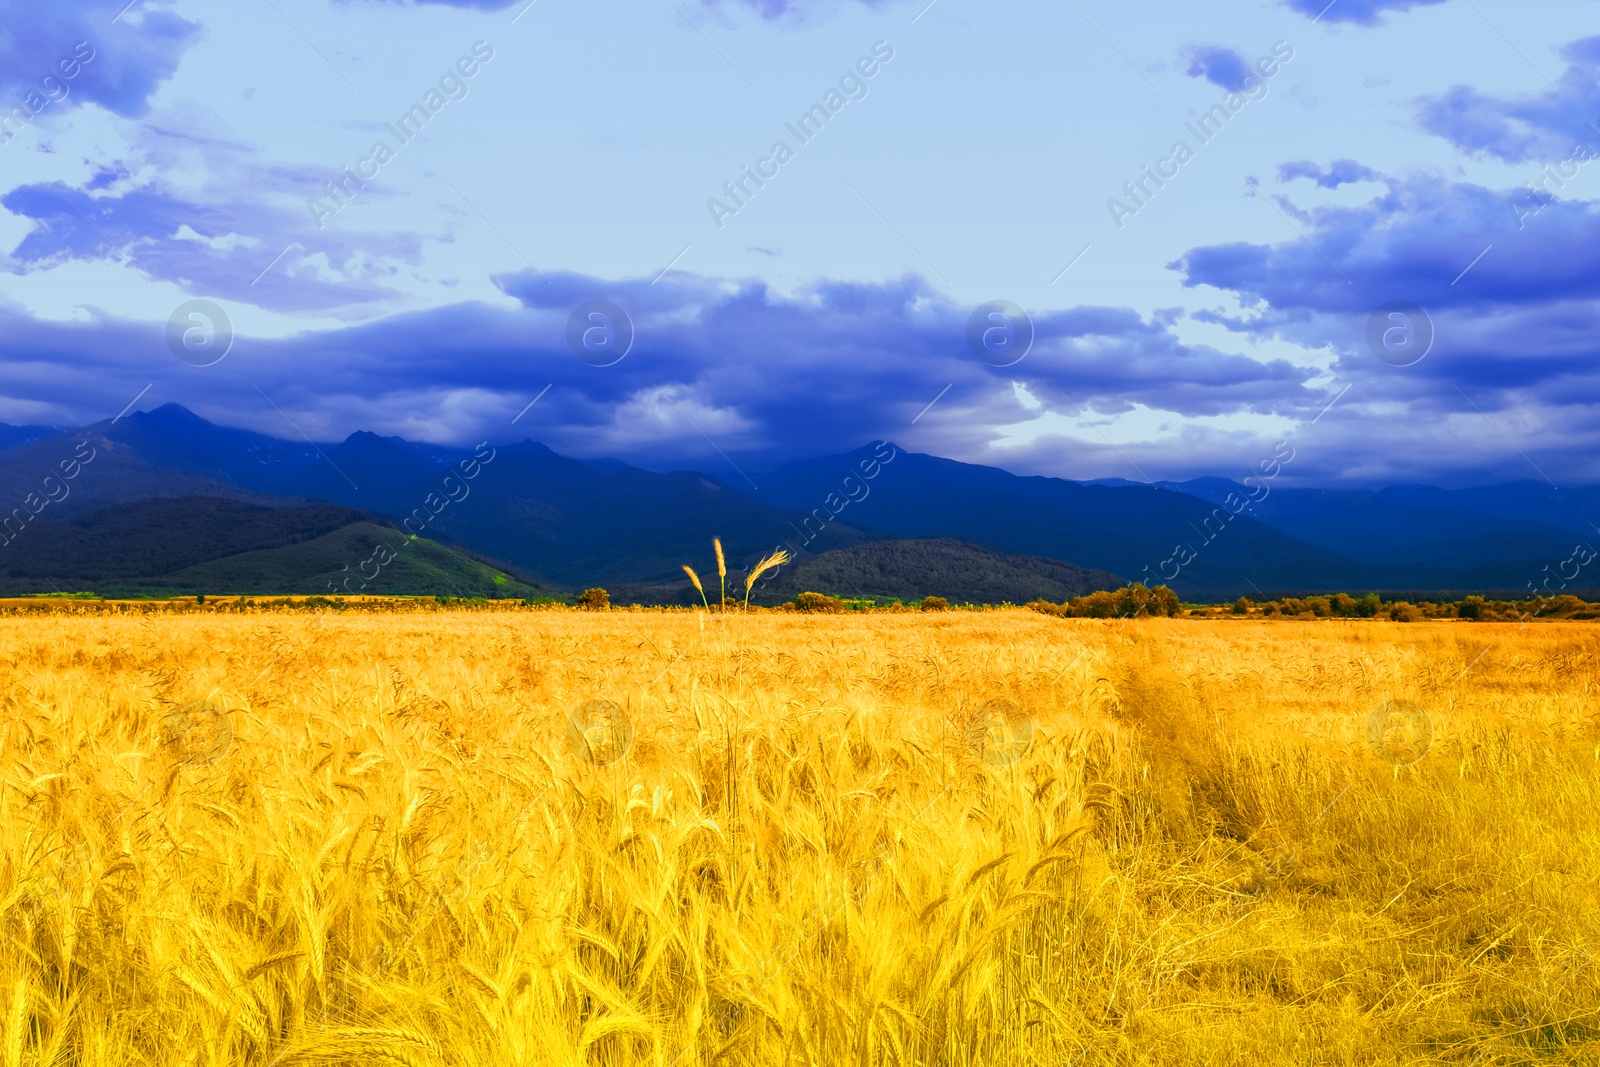 Image of Ukrainian flag. Picturesque view of mountain landscape with yellow wheat field under blue sky